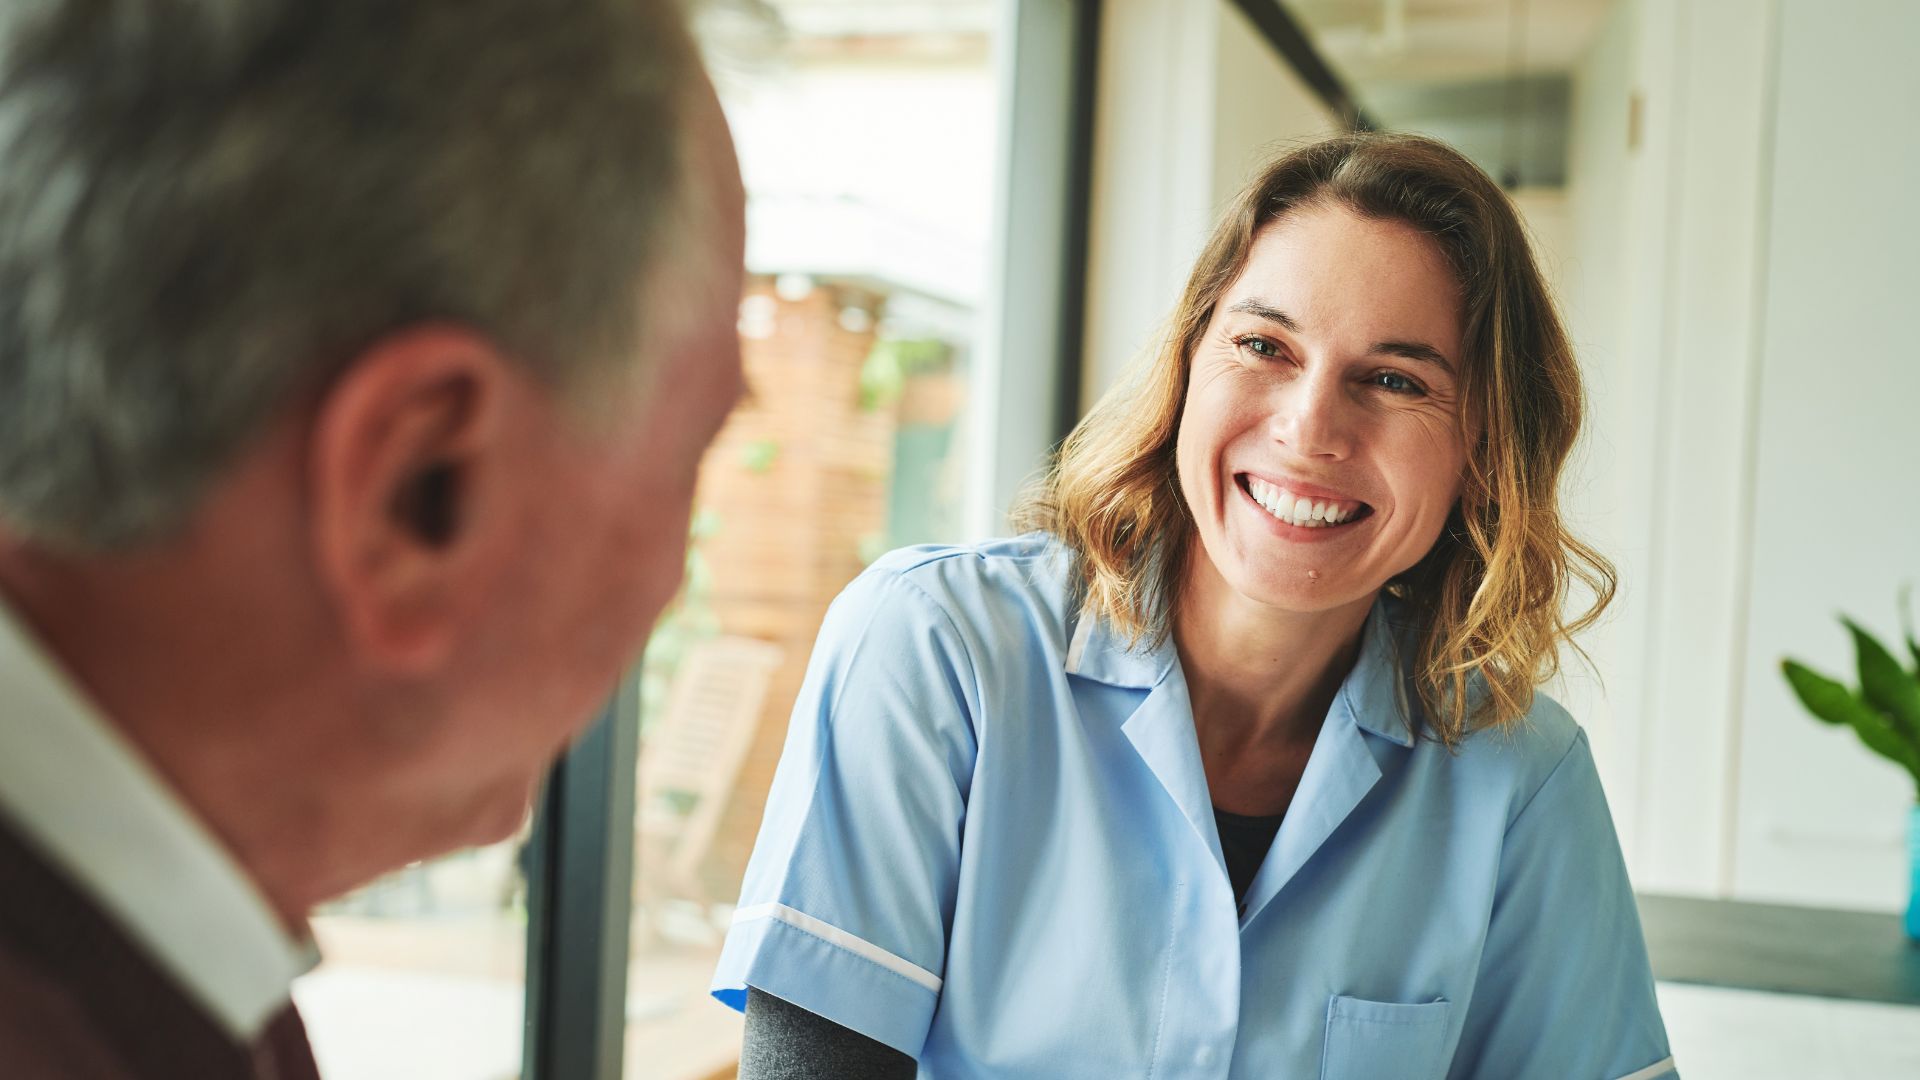 Aged care nurse smiles with older patient